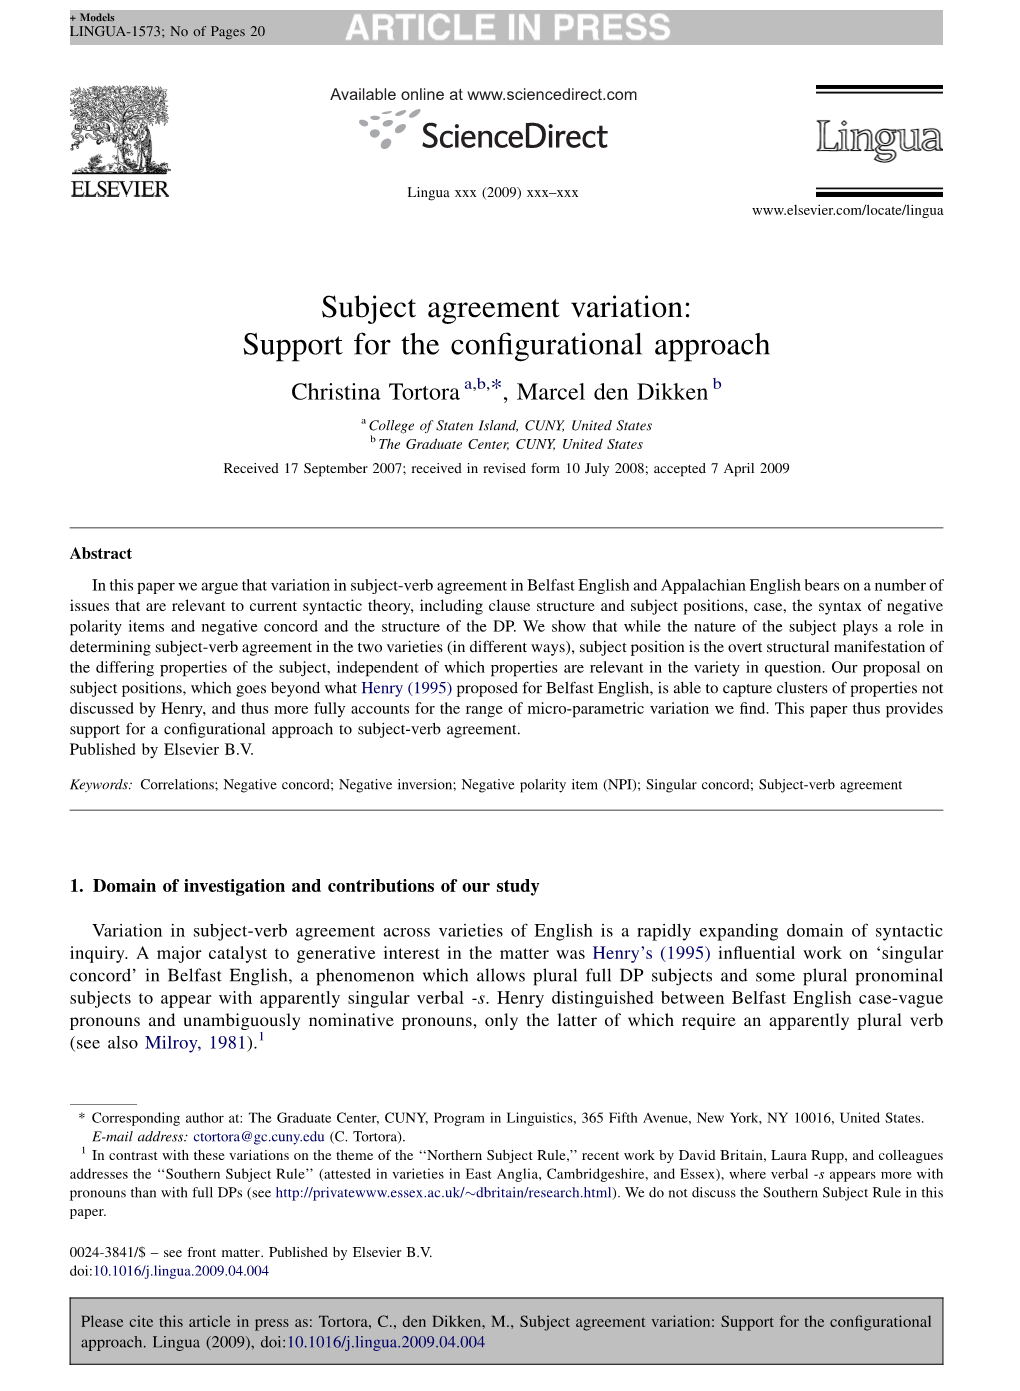 Subject Agreement Variation: Support for the Configurational Approach